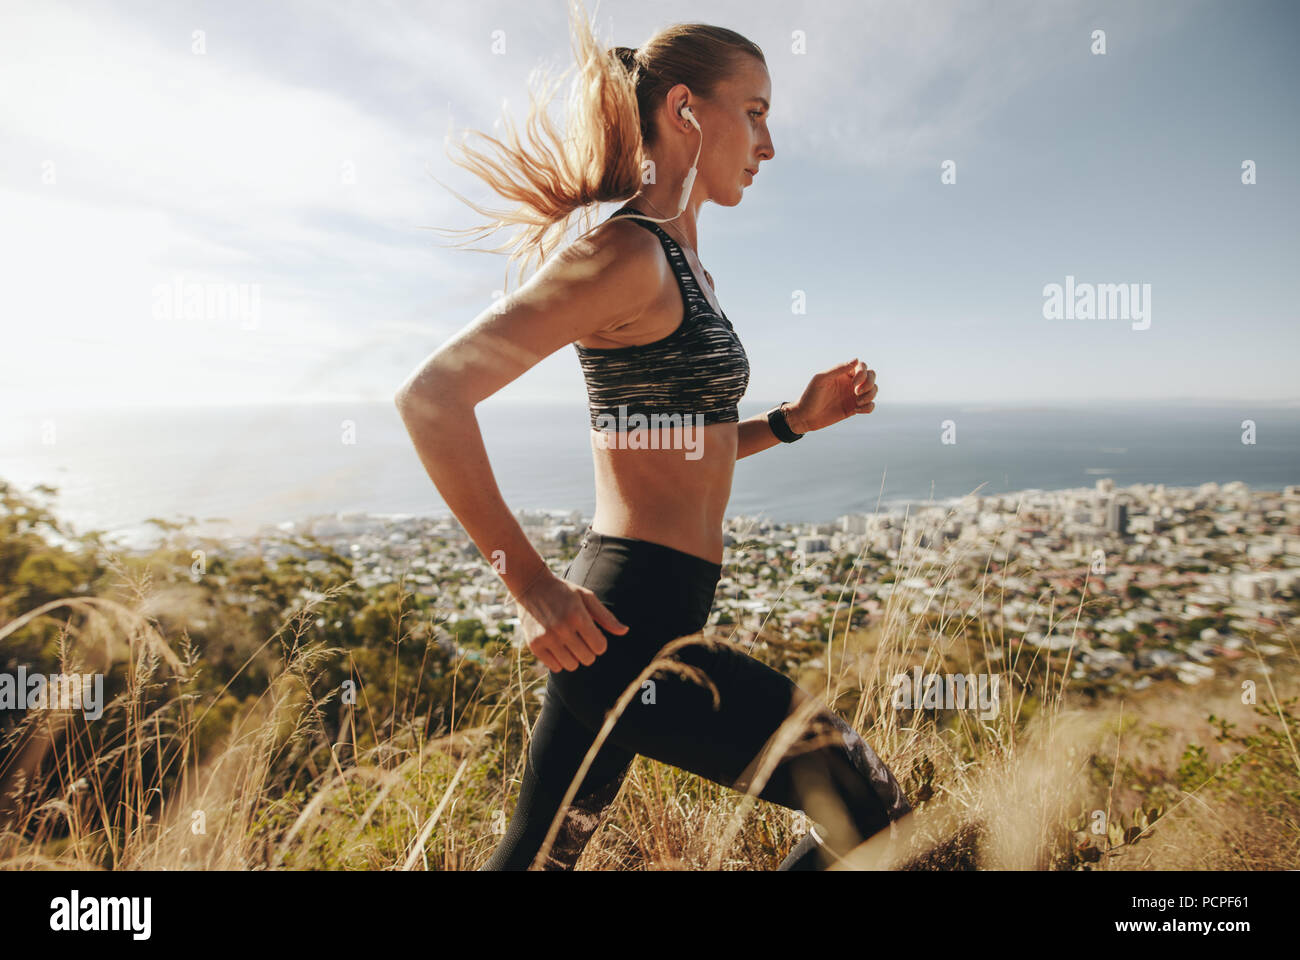 Side view of string young woman in sportswear running through extreme terrain on mountain. Female runner training for cross country run. Stock Photo